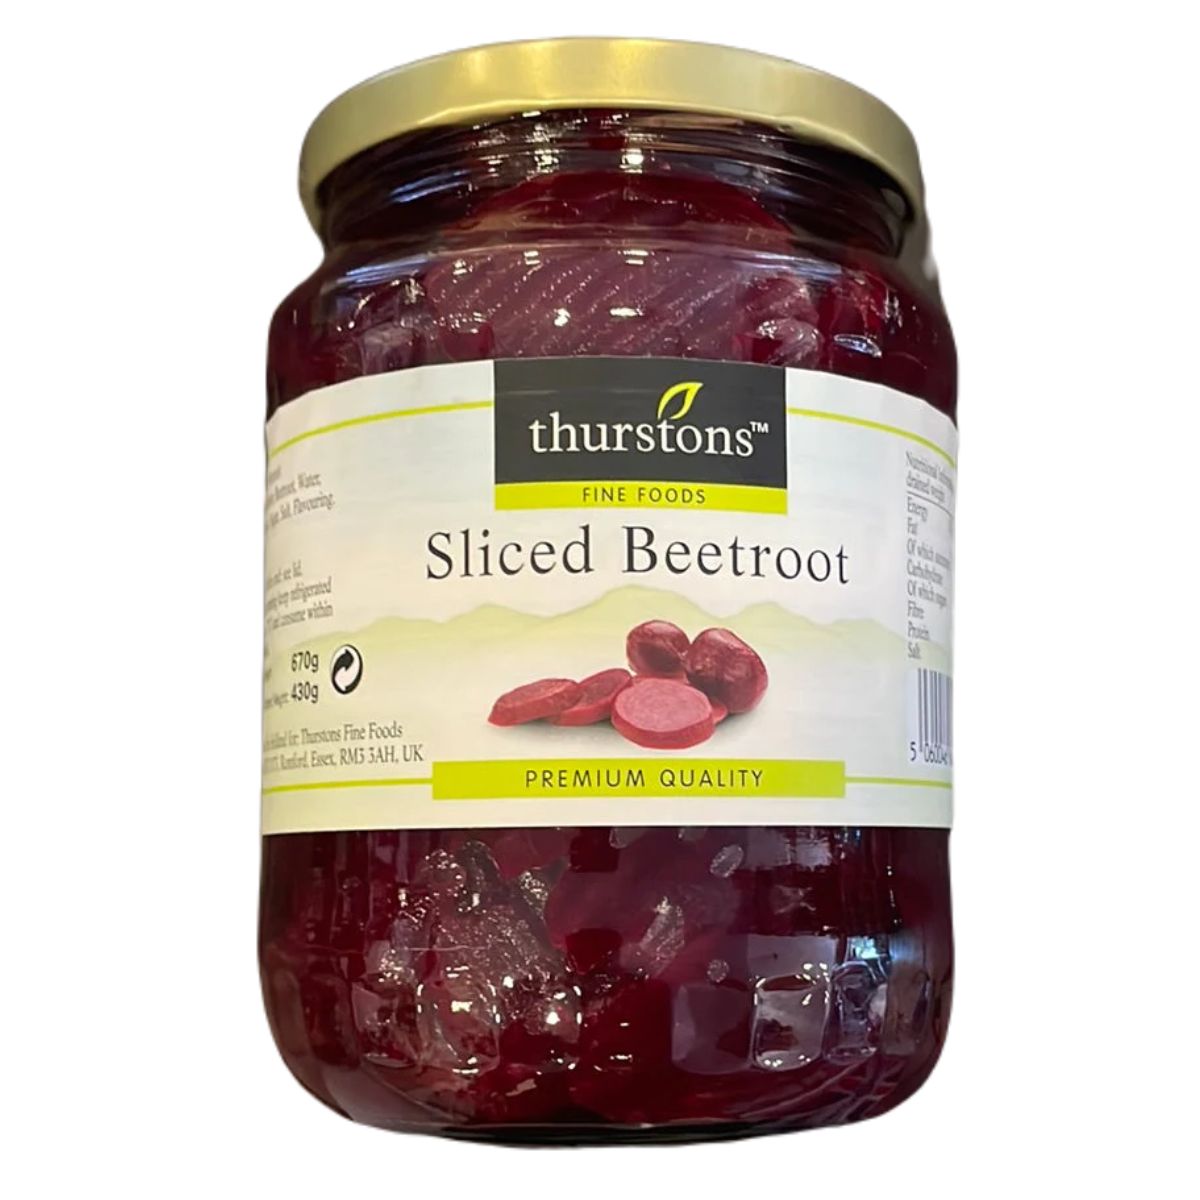 A jar of Thurstons - Sliced Beetroot - 670g on a white background.